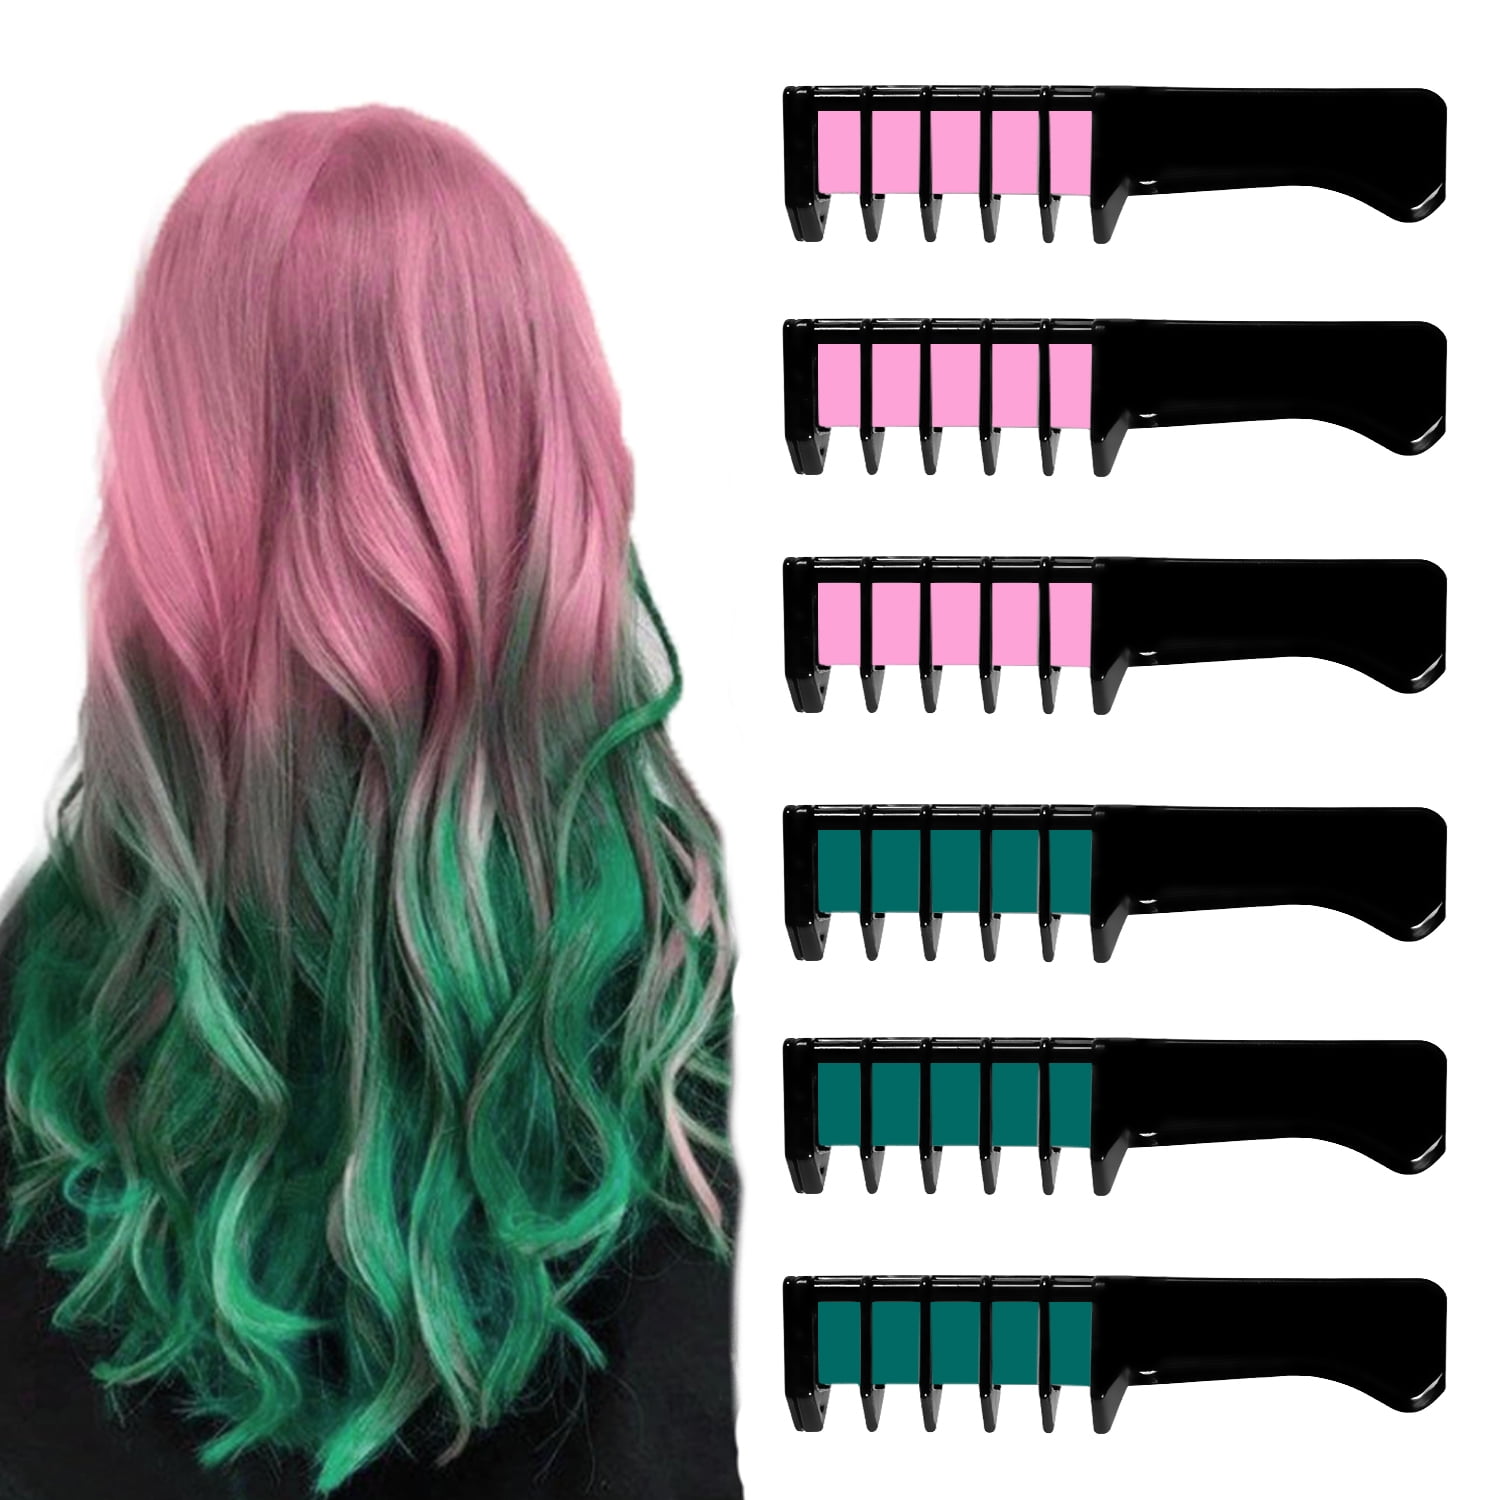 Sanmadrola Hair Chalk Comb for Girls Washable Temporary DIY Hair Color Dye Chalk for Kids Cosplay, Christmas Gifts, 12 Colors, Size: Set 9